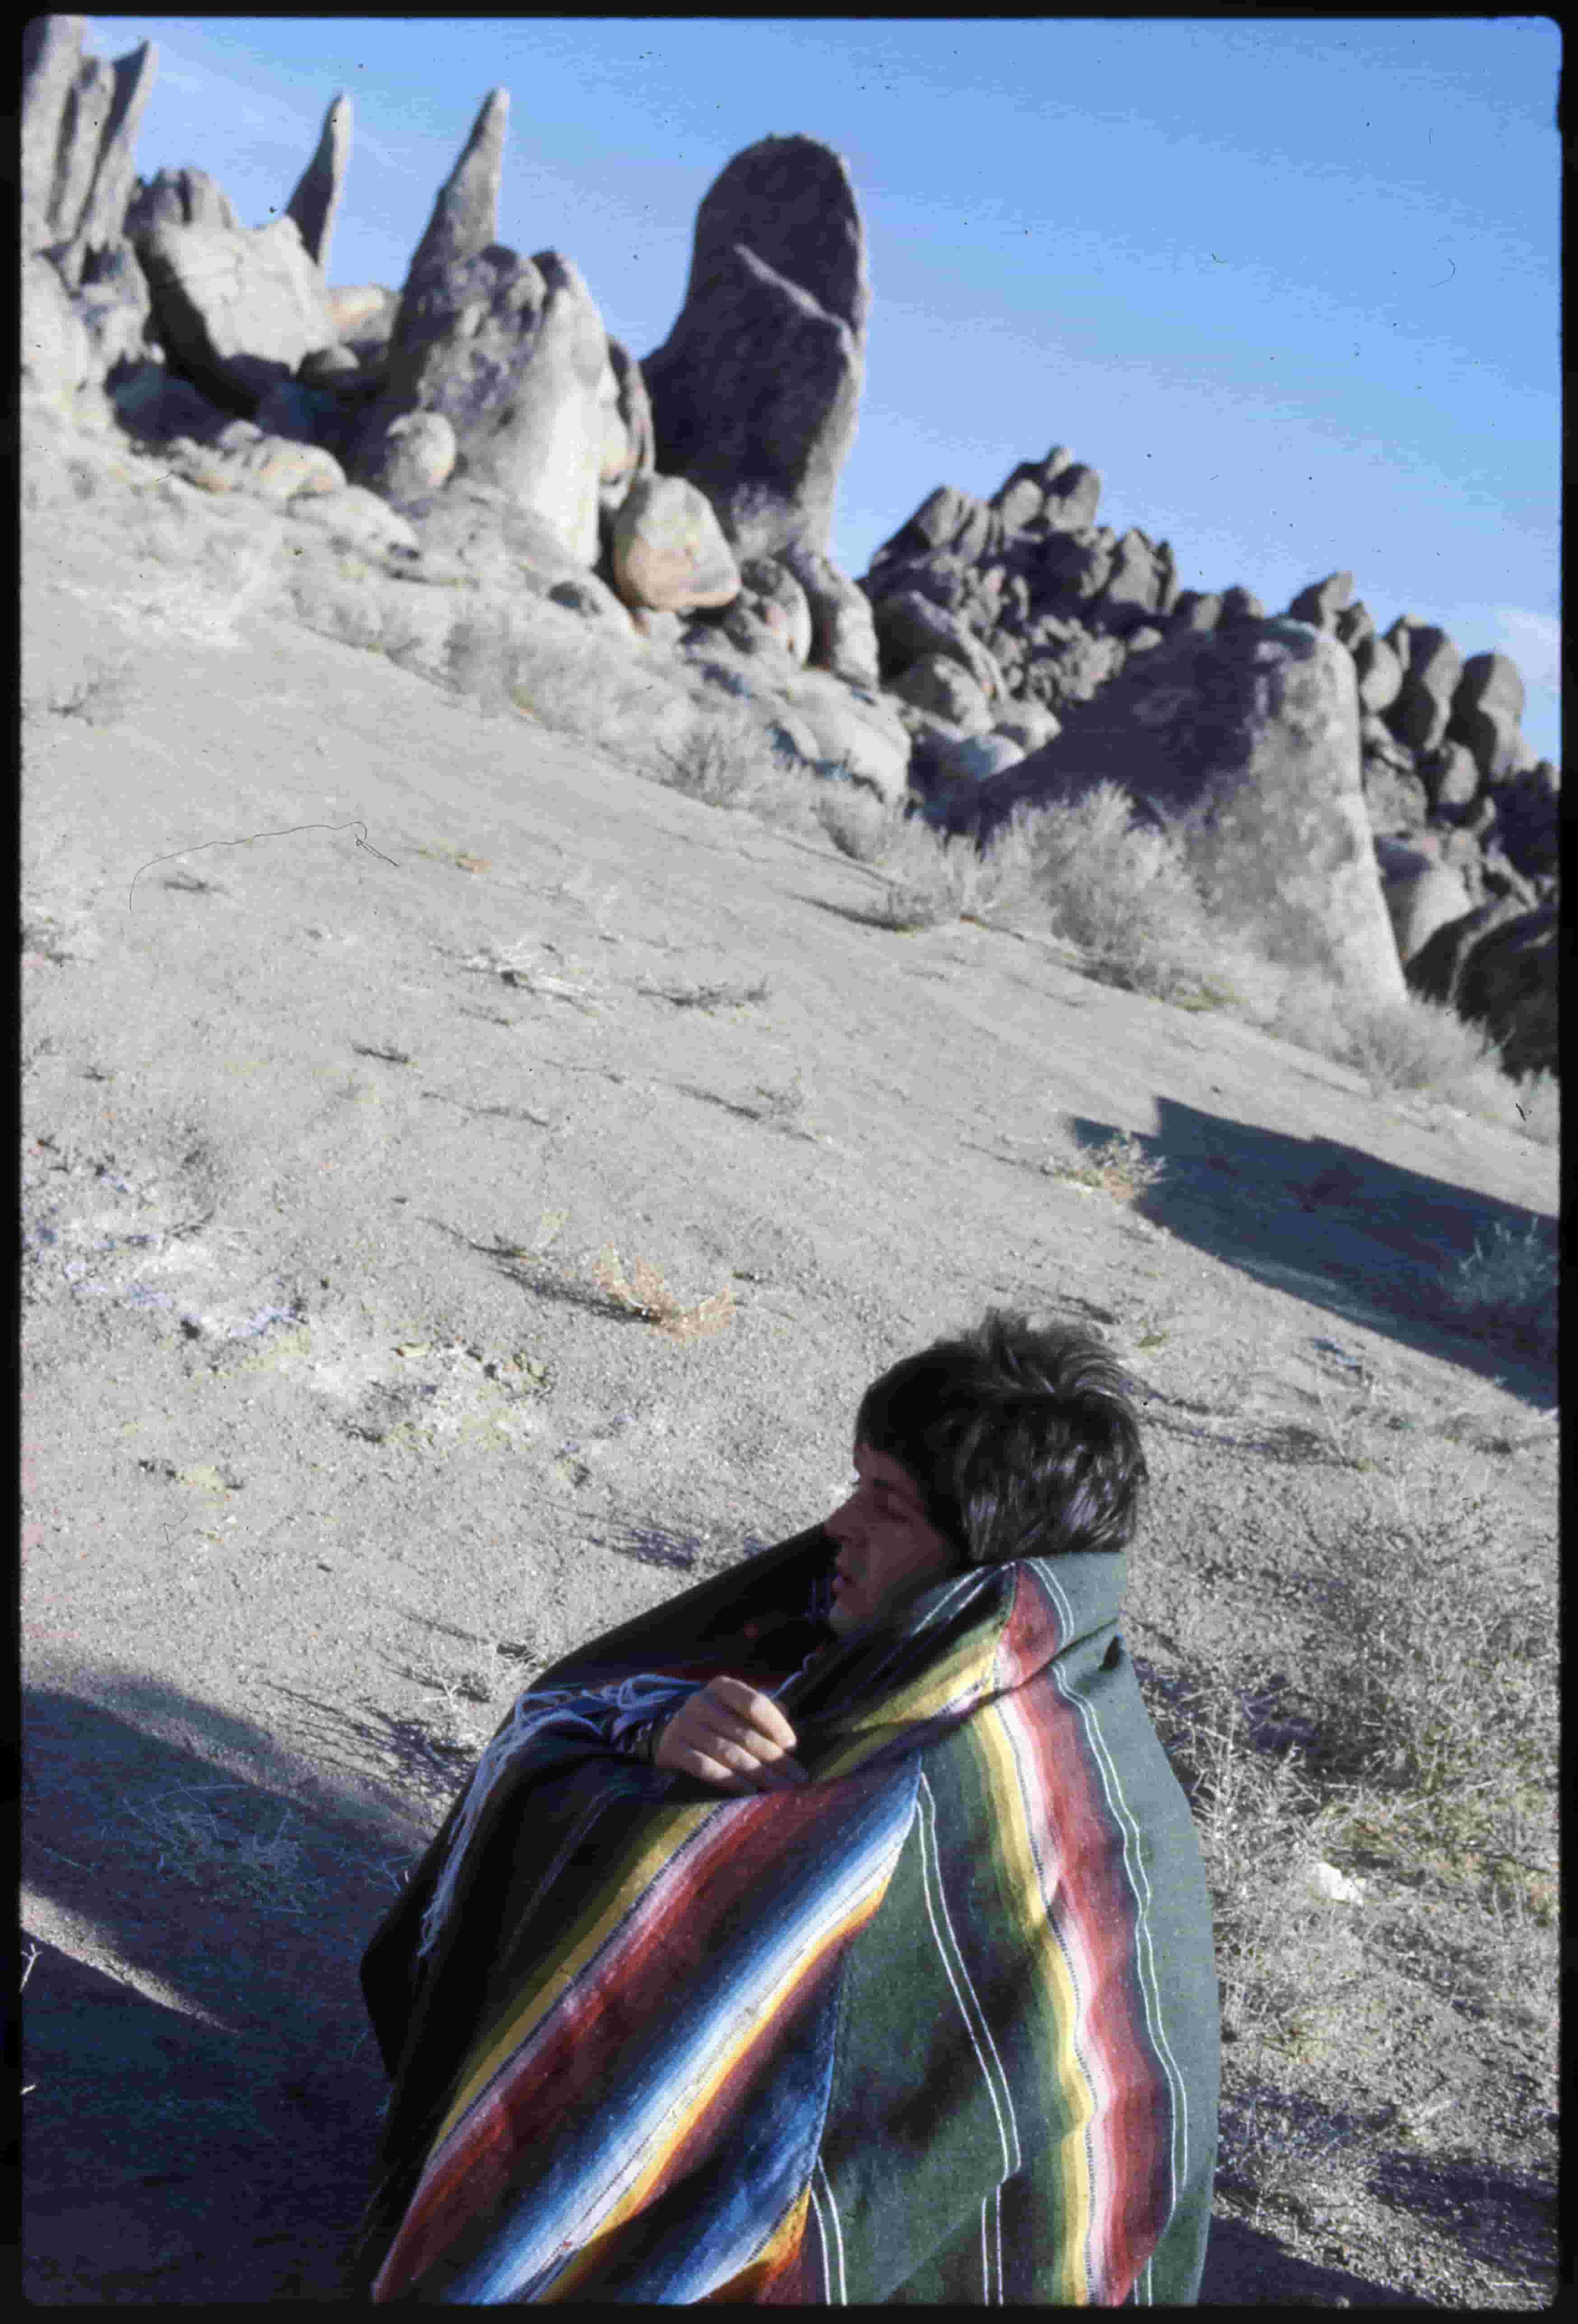 Paul crouching in the desert wearing a poncho